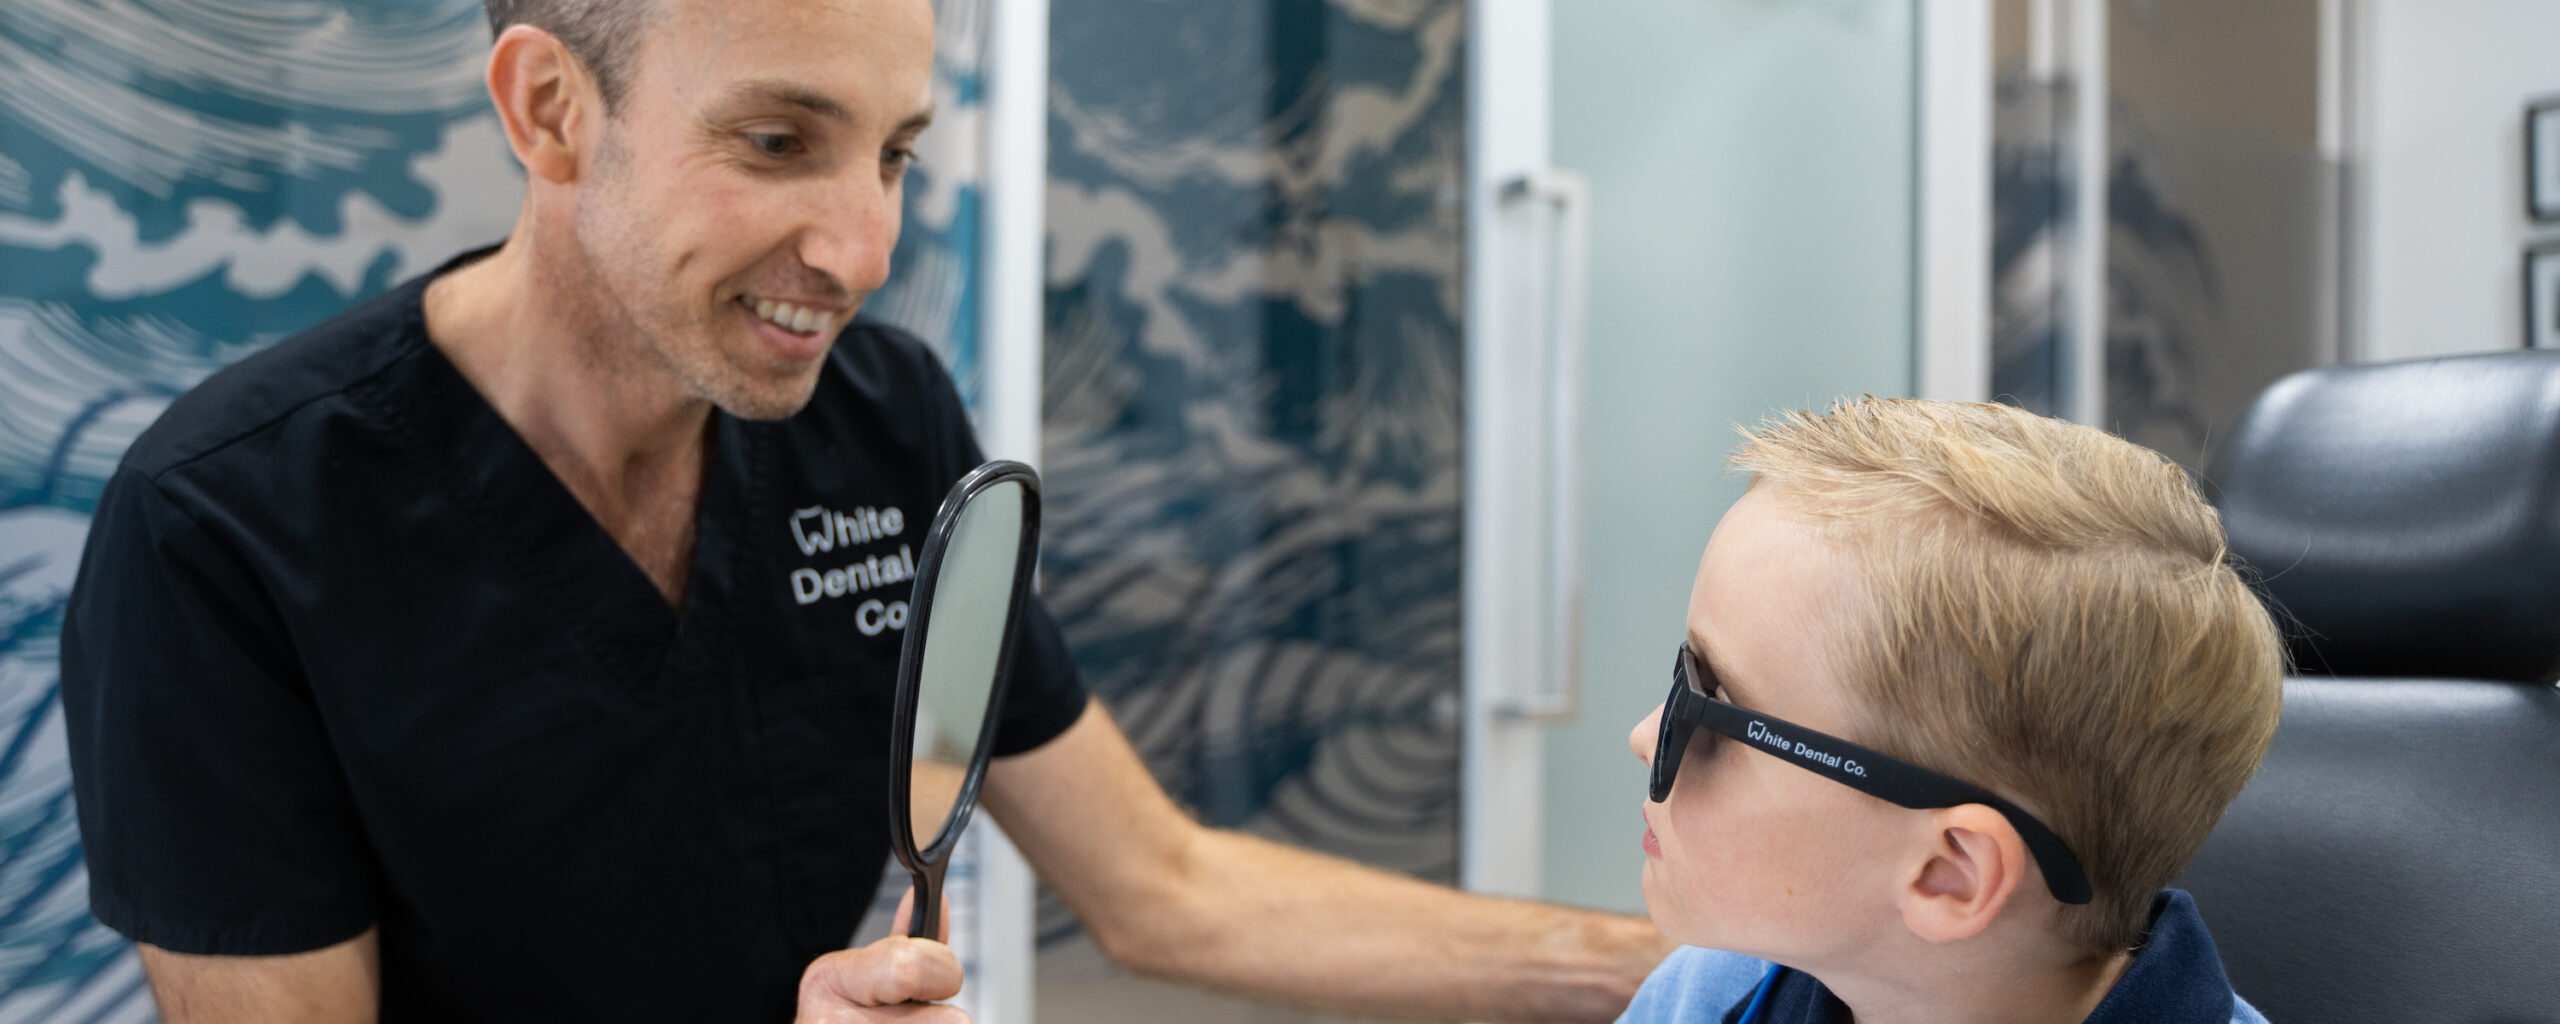 Dr Nick White holds a mirror so a young child can check their smile after an appointment